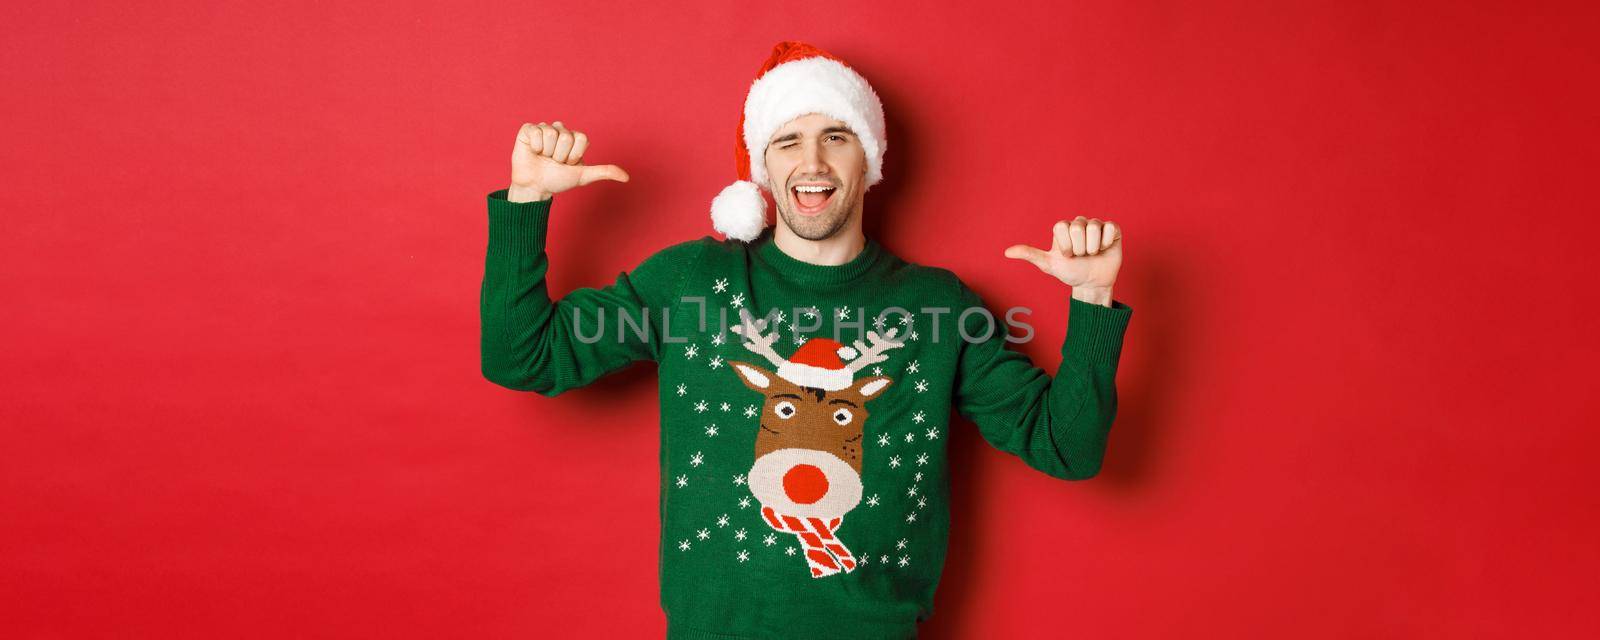 Concept of winter holidays, christmas and lifestyle. Sassy handsome man in santa hat and green sweater, pointing at himself and winking, standing over red background.